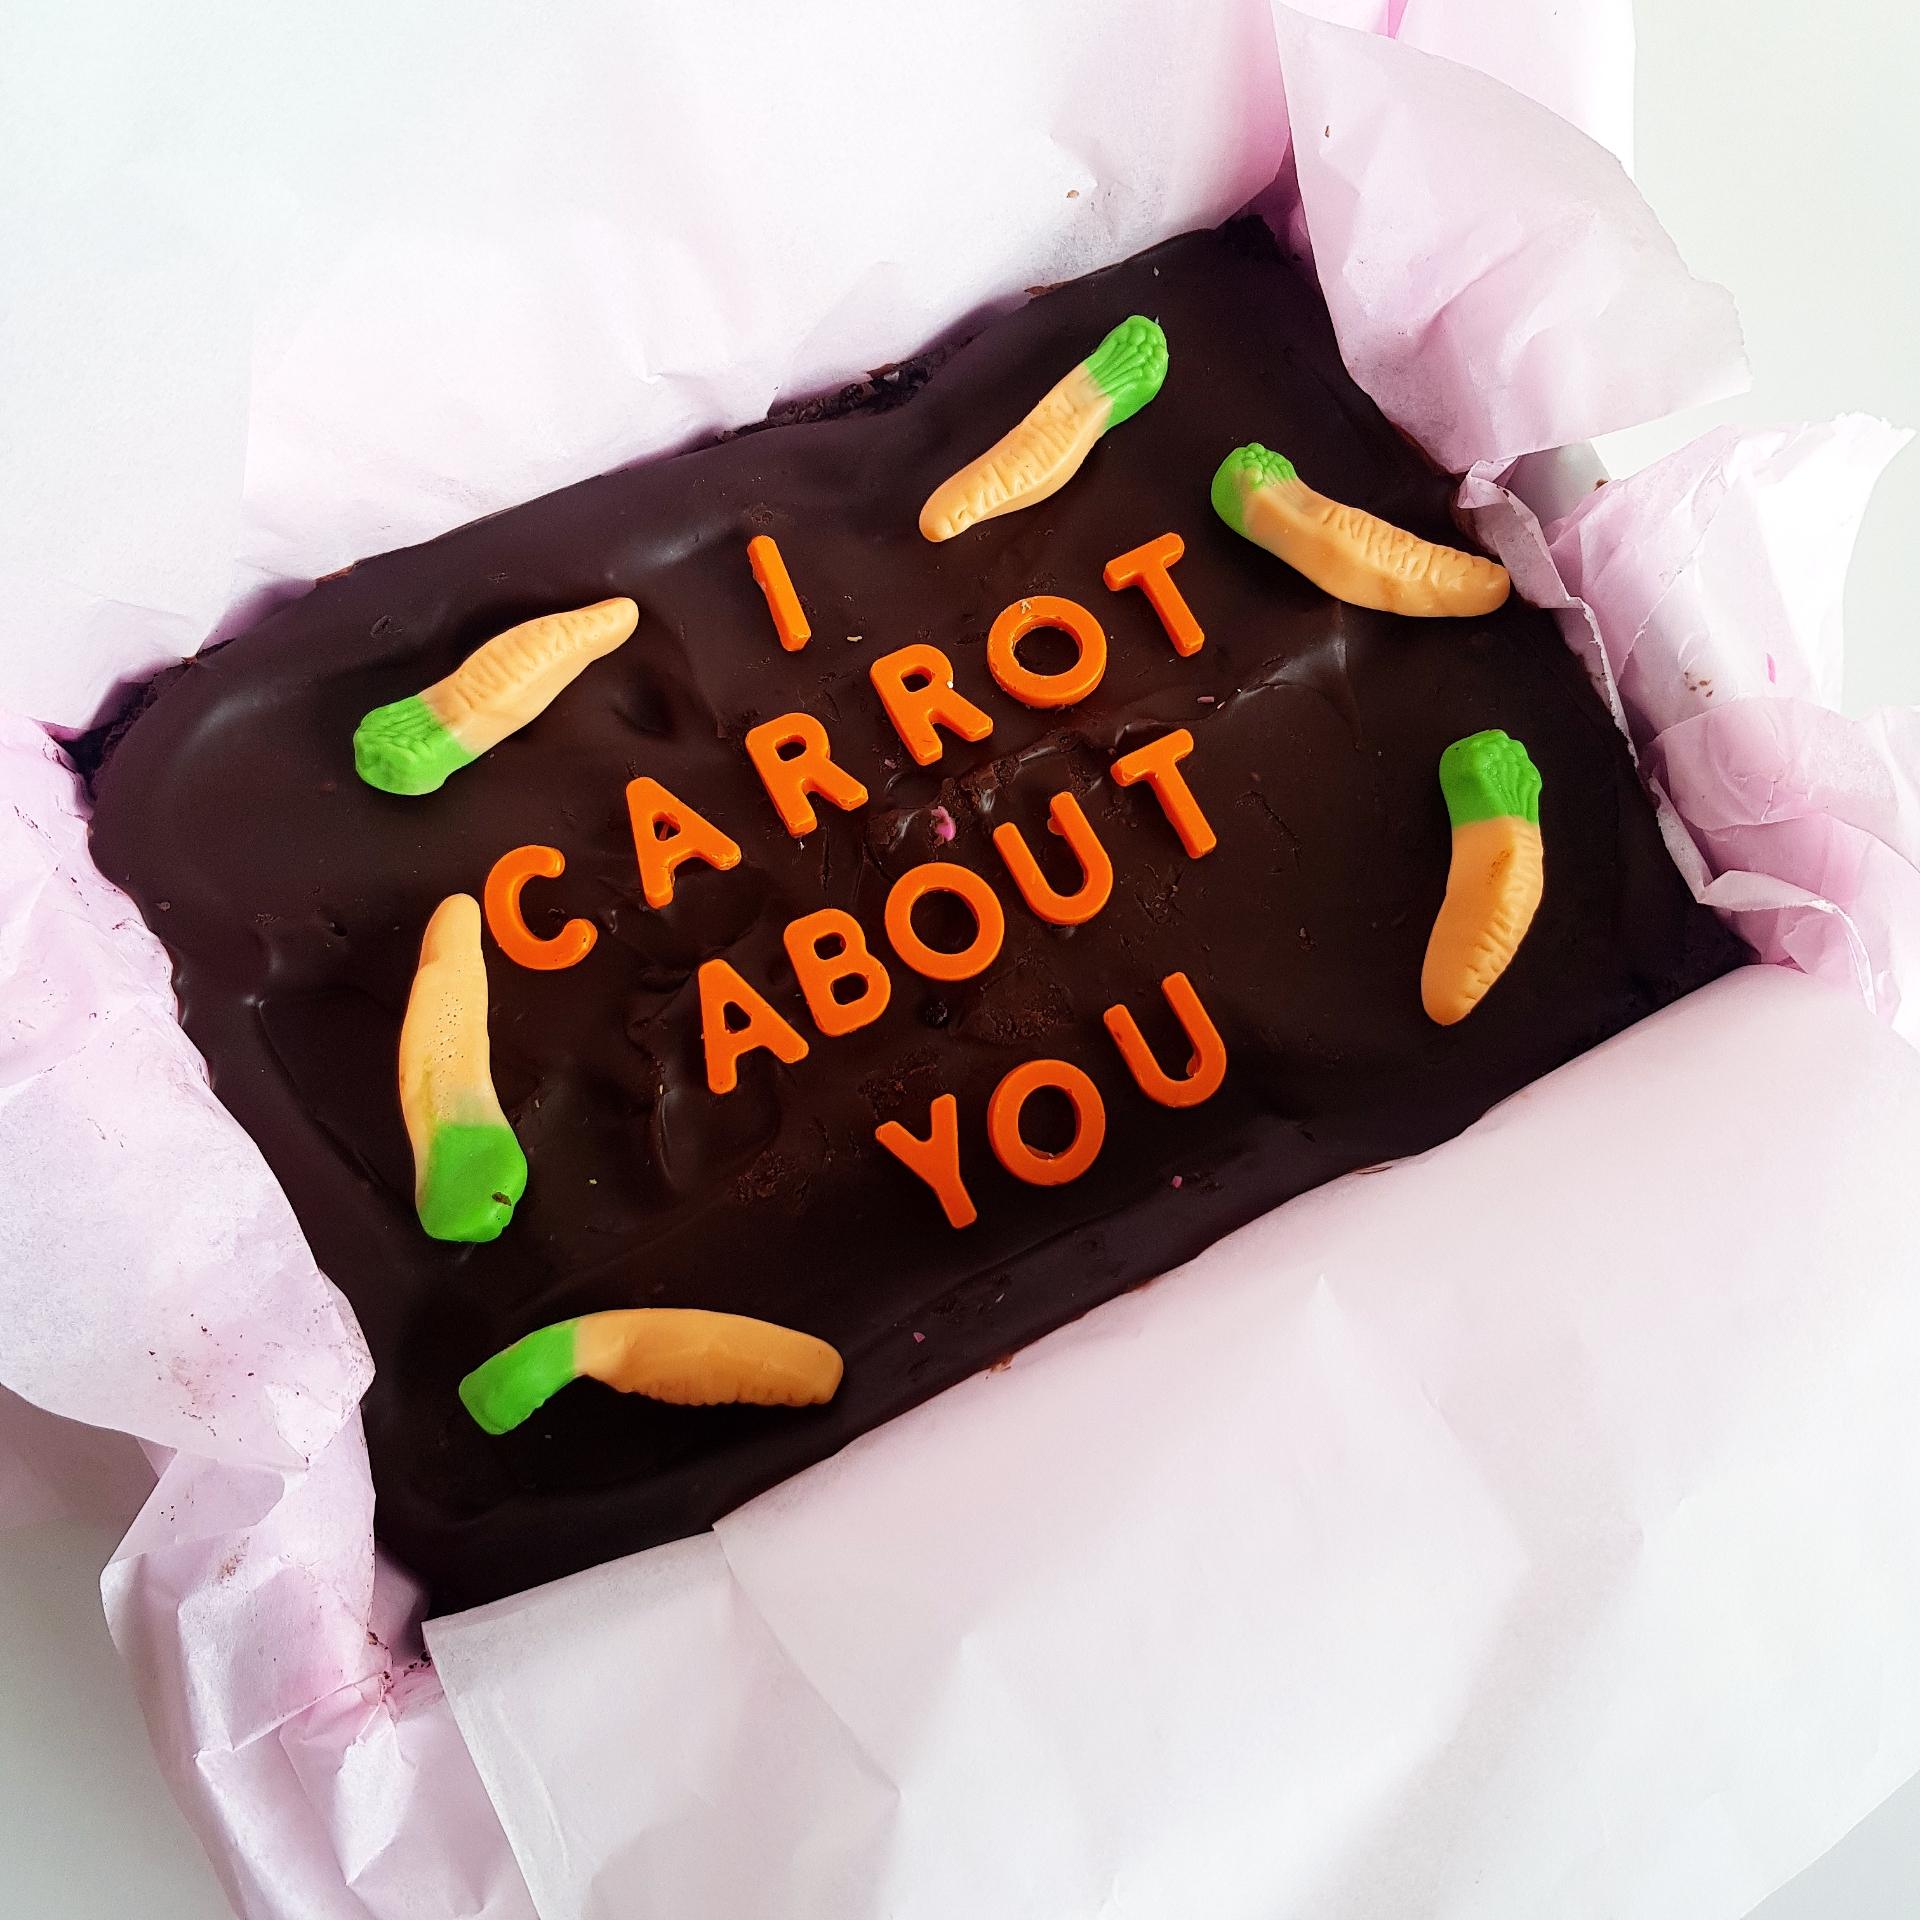 Brownie Message Box – I Carrot About You